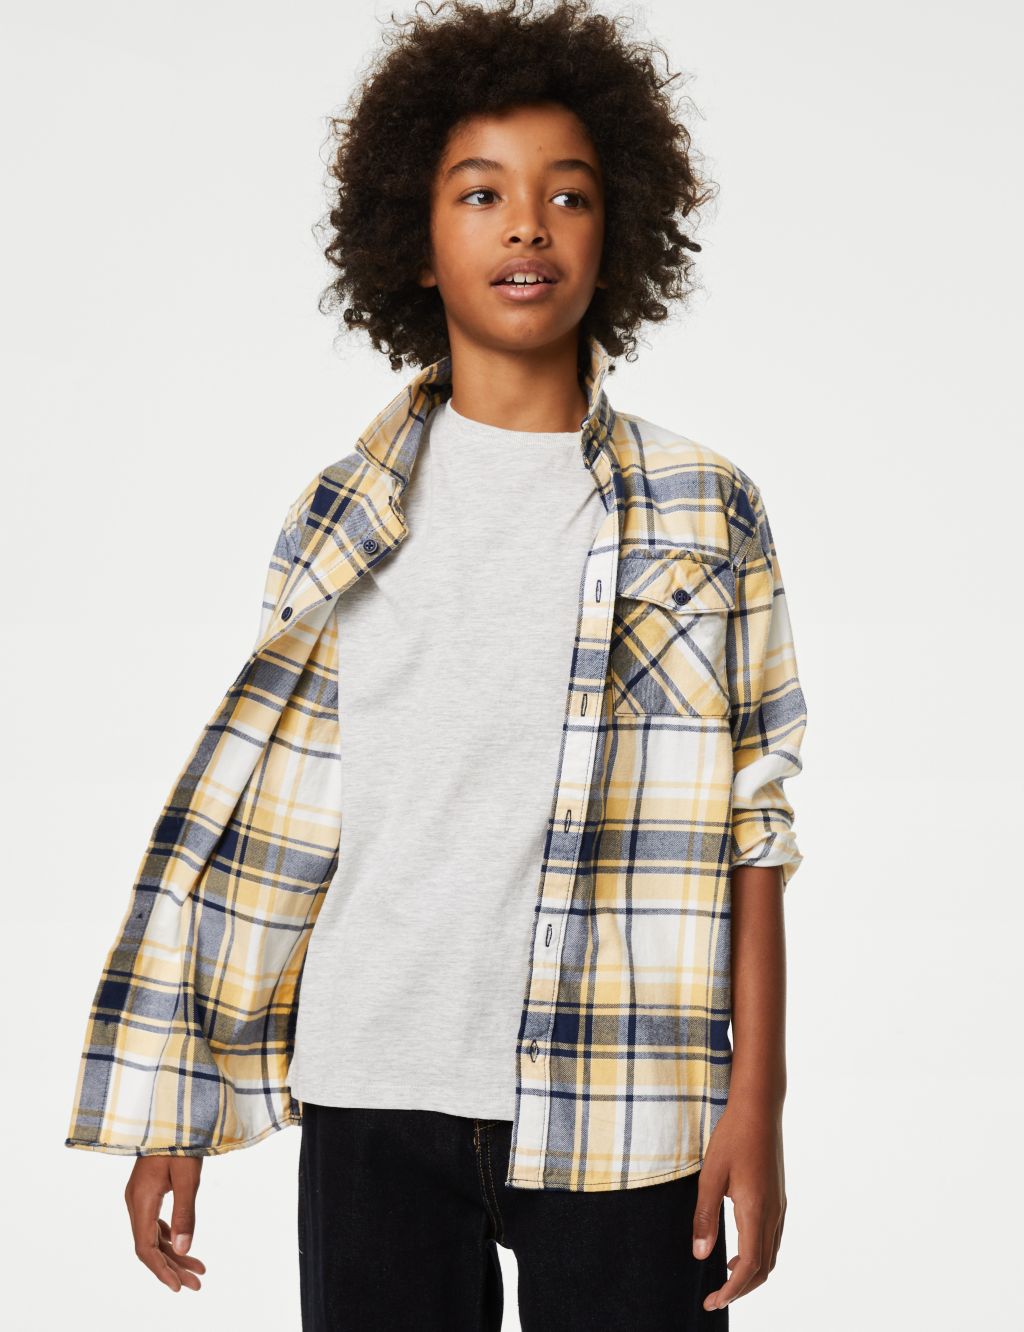 2pc Pure Cotton Checked Shirt and T-Shirt (6-16 Yrs) image 3